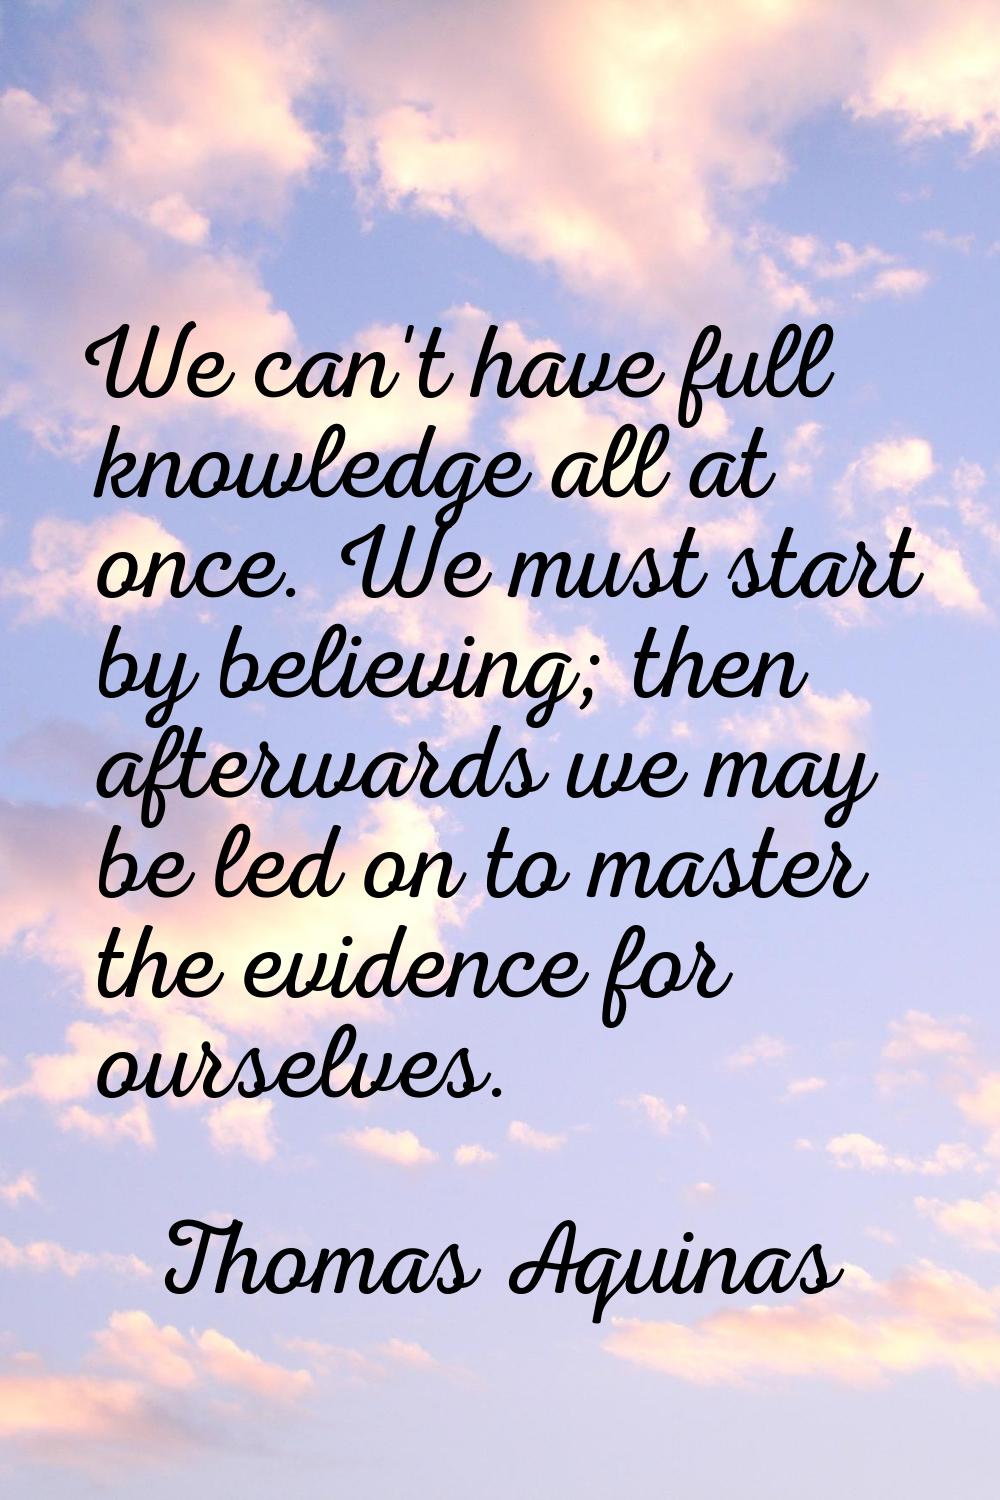 We can't have full knowledge all at once. We must start by believing; then afterwards we may be led